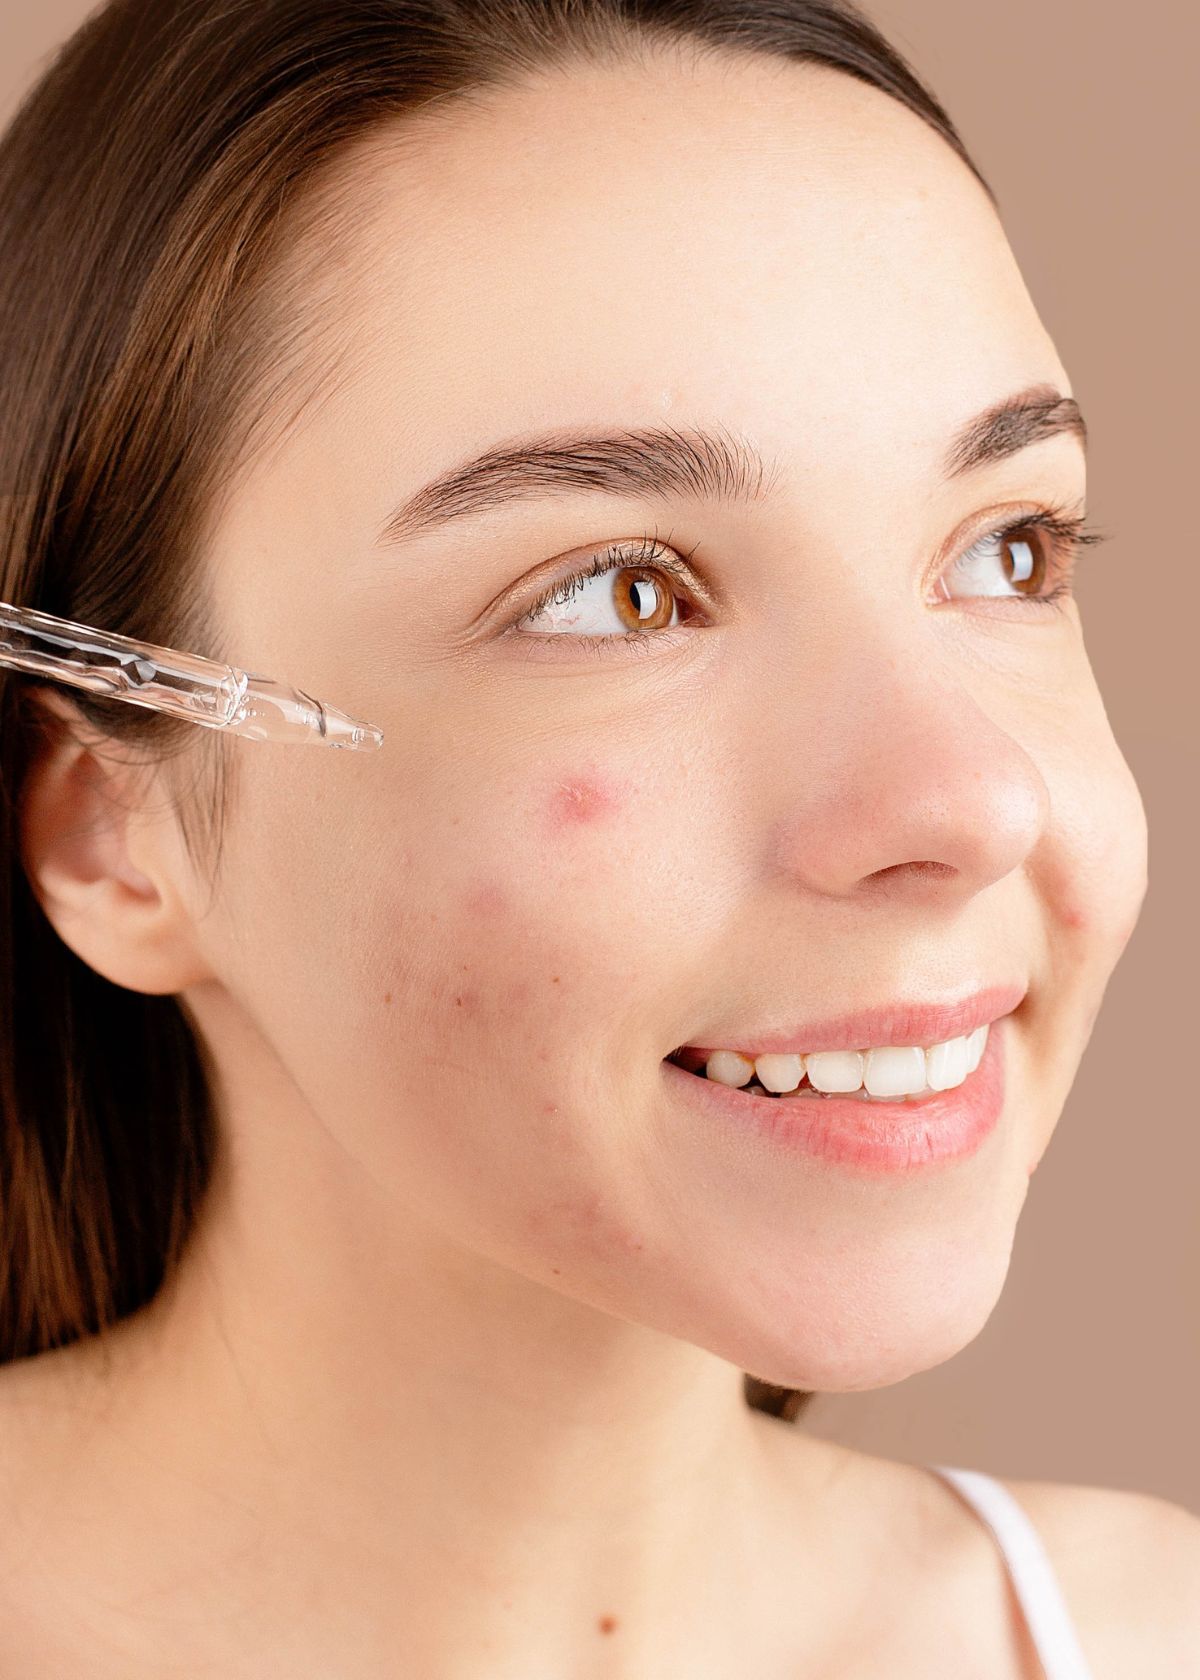 Is Vitamin C Good for Acne-Prone Skin? Unravel the Truth